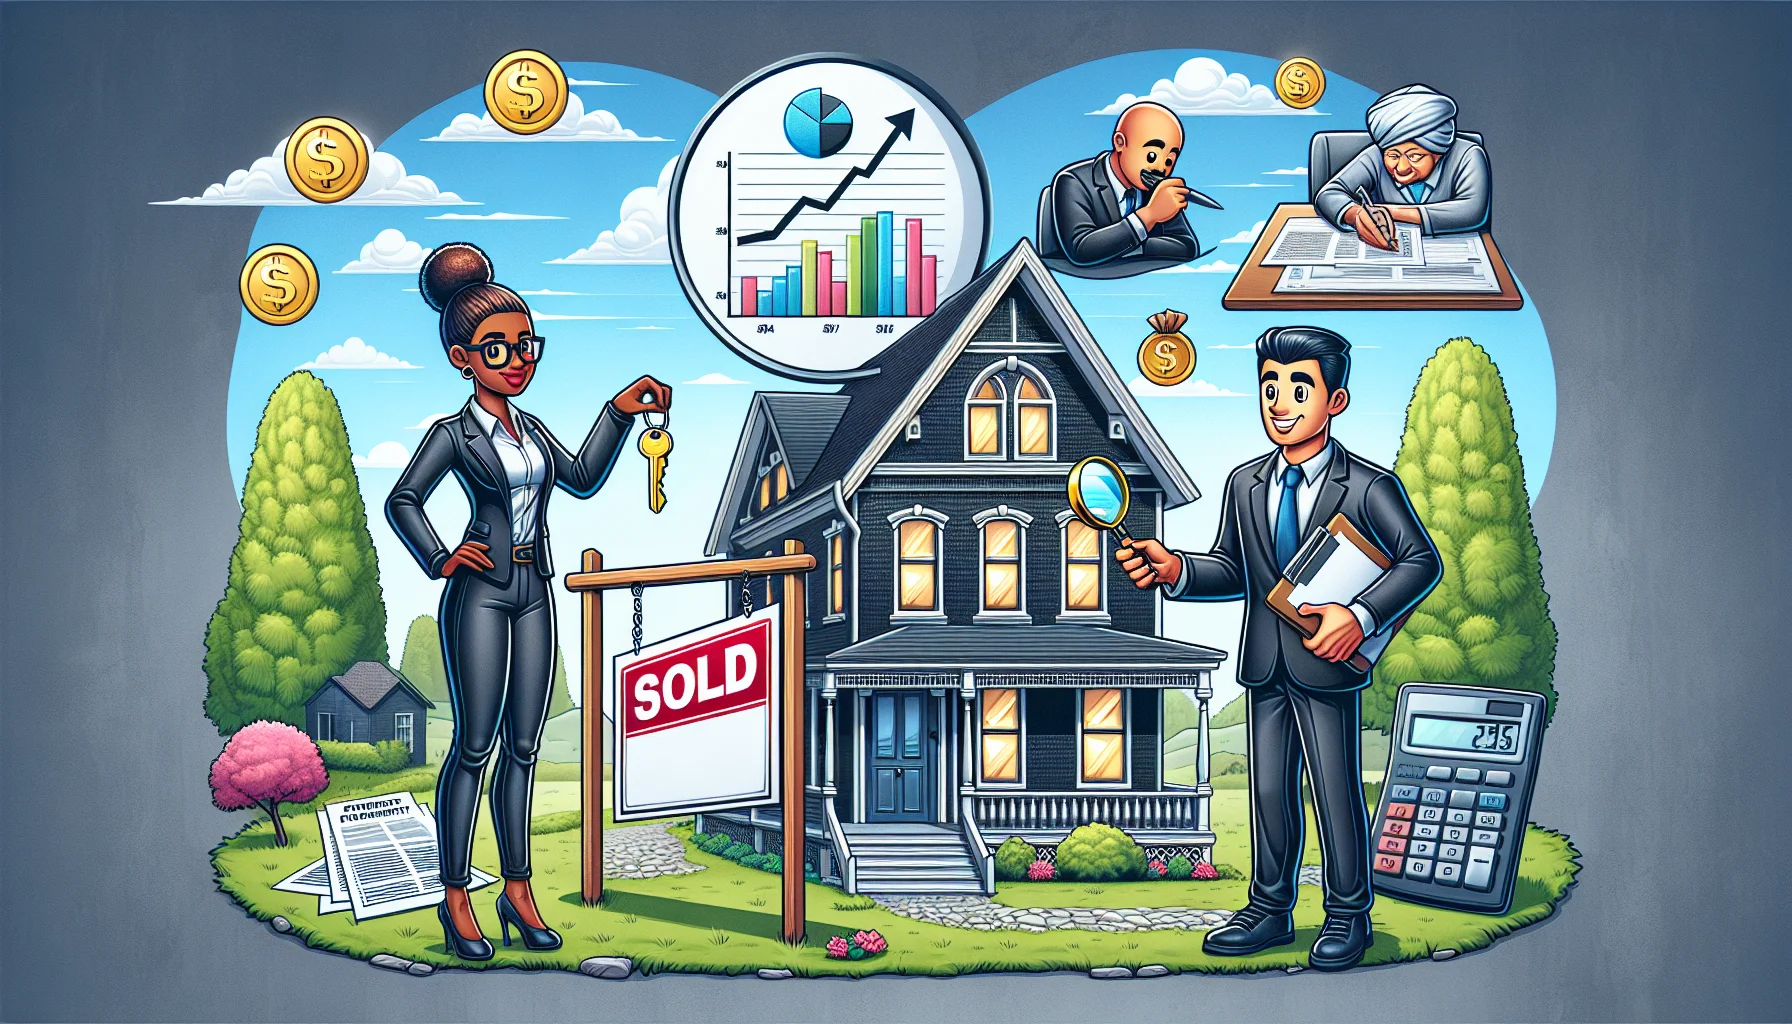 Generate a humorous, detailed, and realistic image which symbolizes the concept of 'Real Estate Investing for dummies'. The scene should depict the ideal scenario in real estate investment. It features a Black female investor wearing professional attire, standing next to a 'Sold' sign in front of a charming Victorian-style home. She is holding a magnifying glass over a property blueprint, while a Middle-Eastern male broker hands over the keys with a satisfied smile. Surrounding the scene are essential elements of a perfect real estate deal: a growth chart showing the property value increasing, and a calculator displaying a satisfying return on investment.